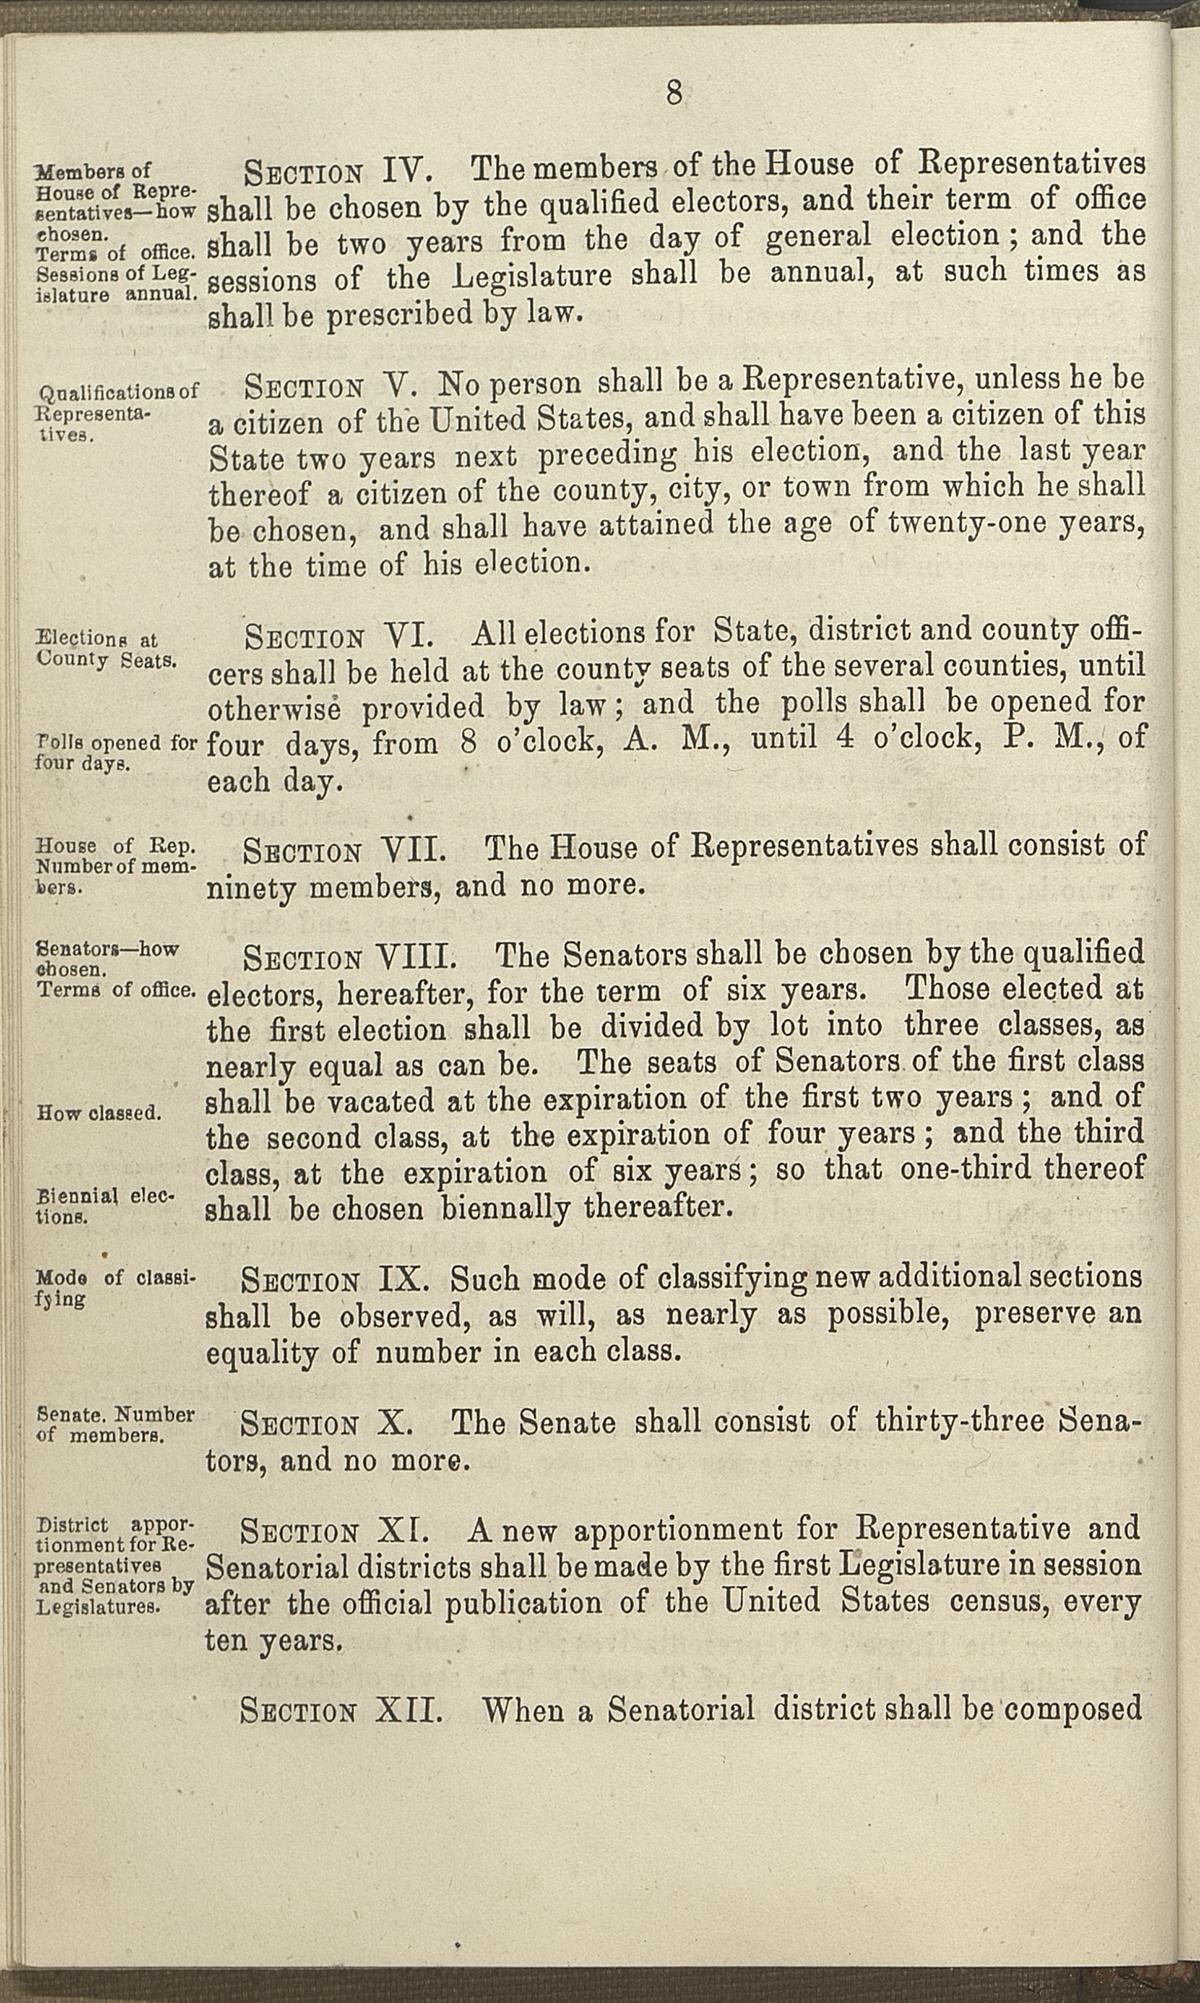 Article IV, Sections III-XII